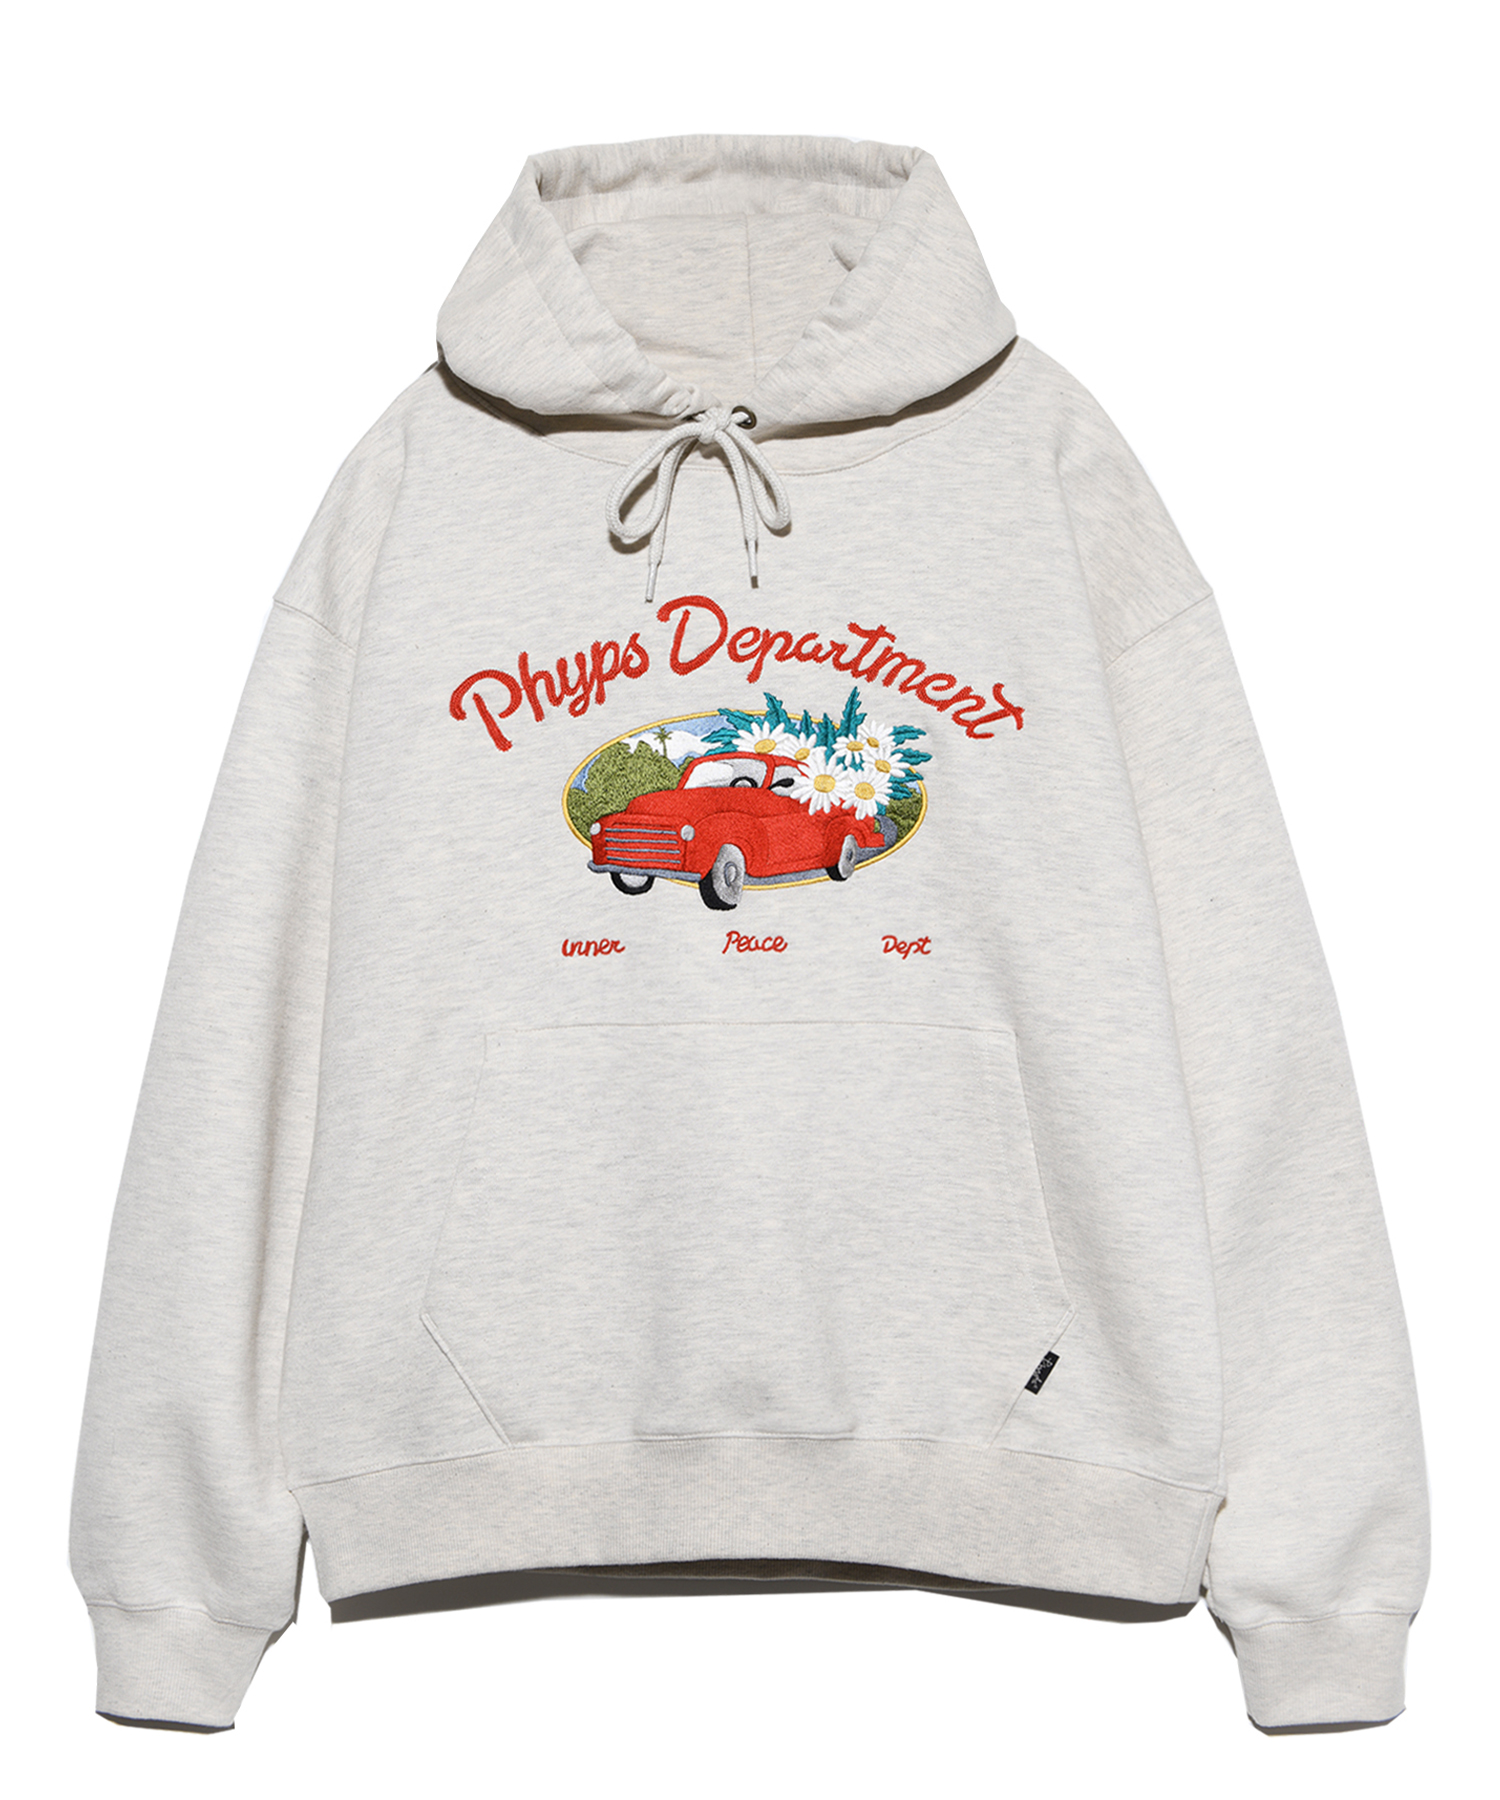 FLOWER DELIVERY HOODIE OATMEAL